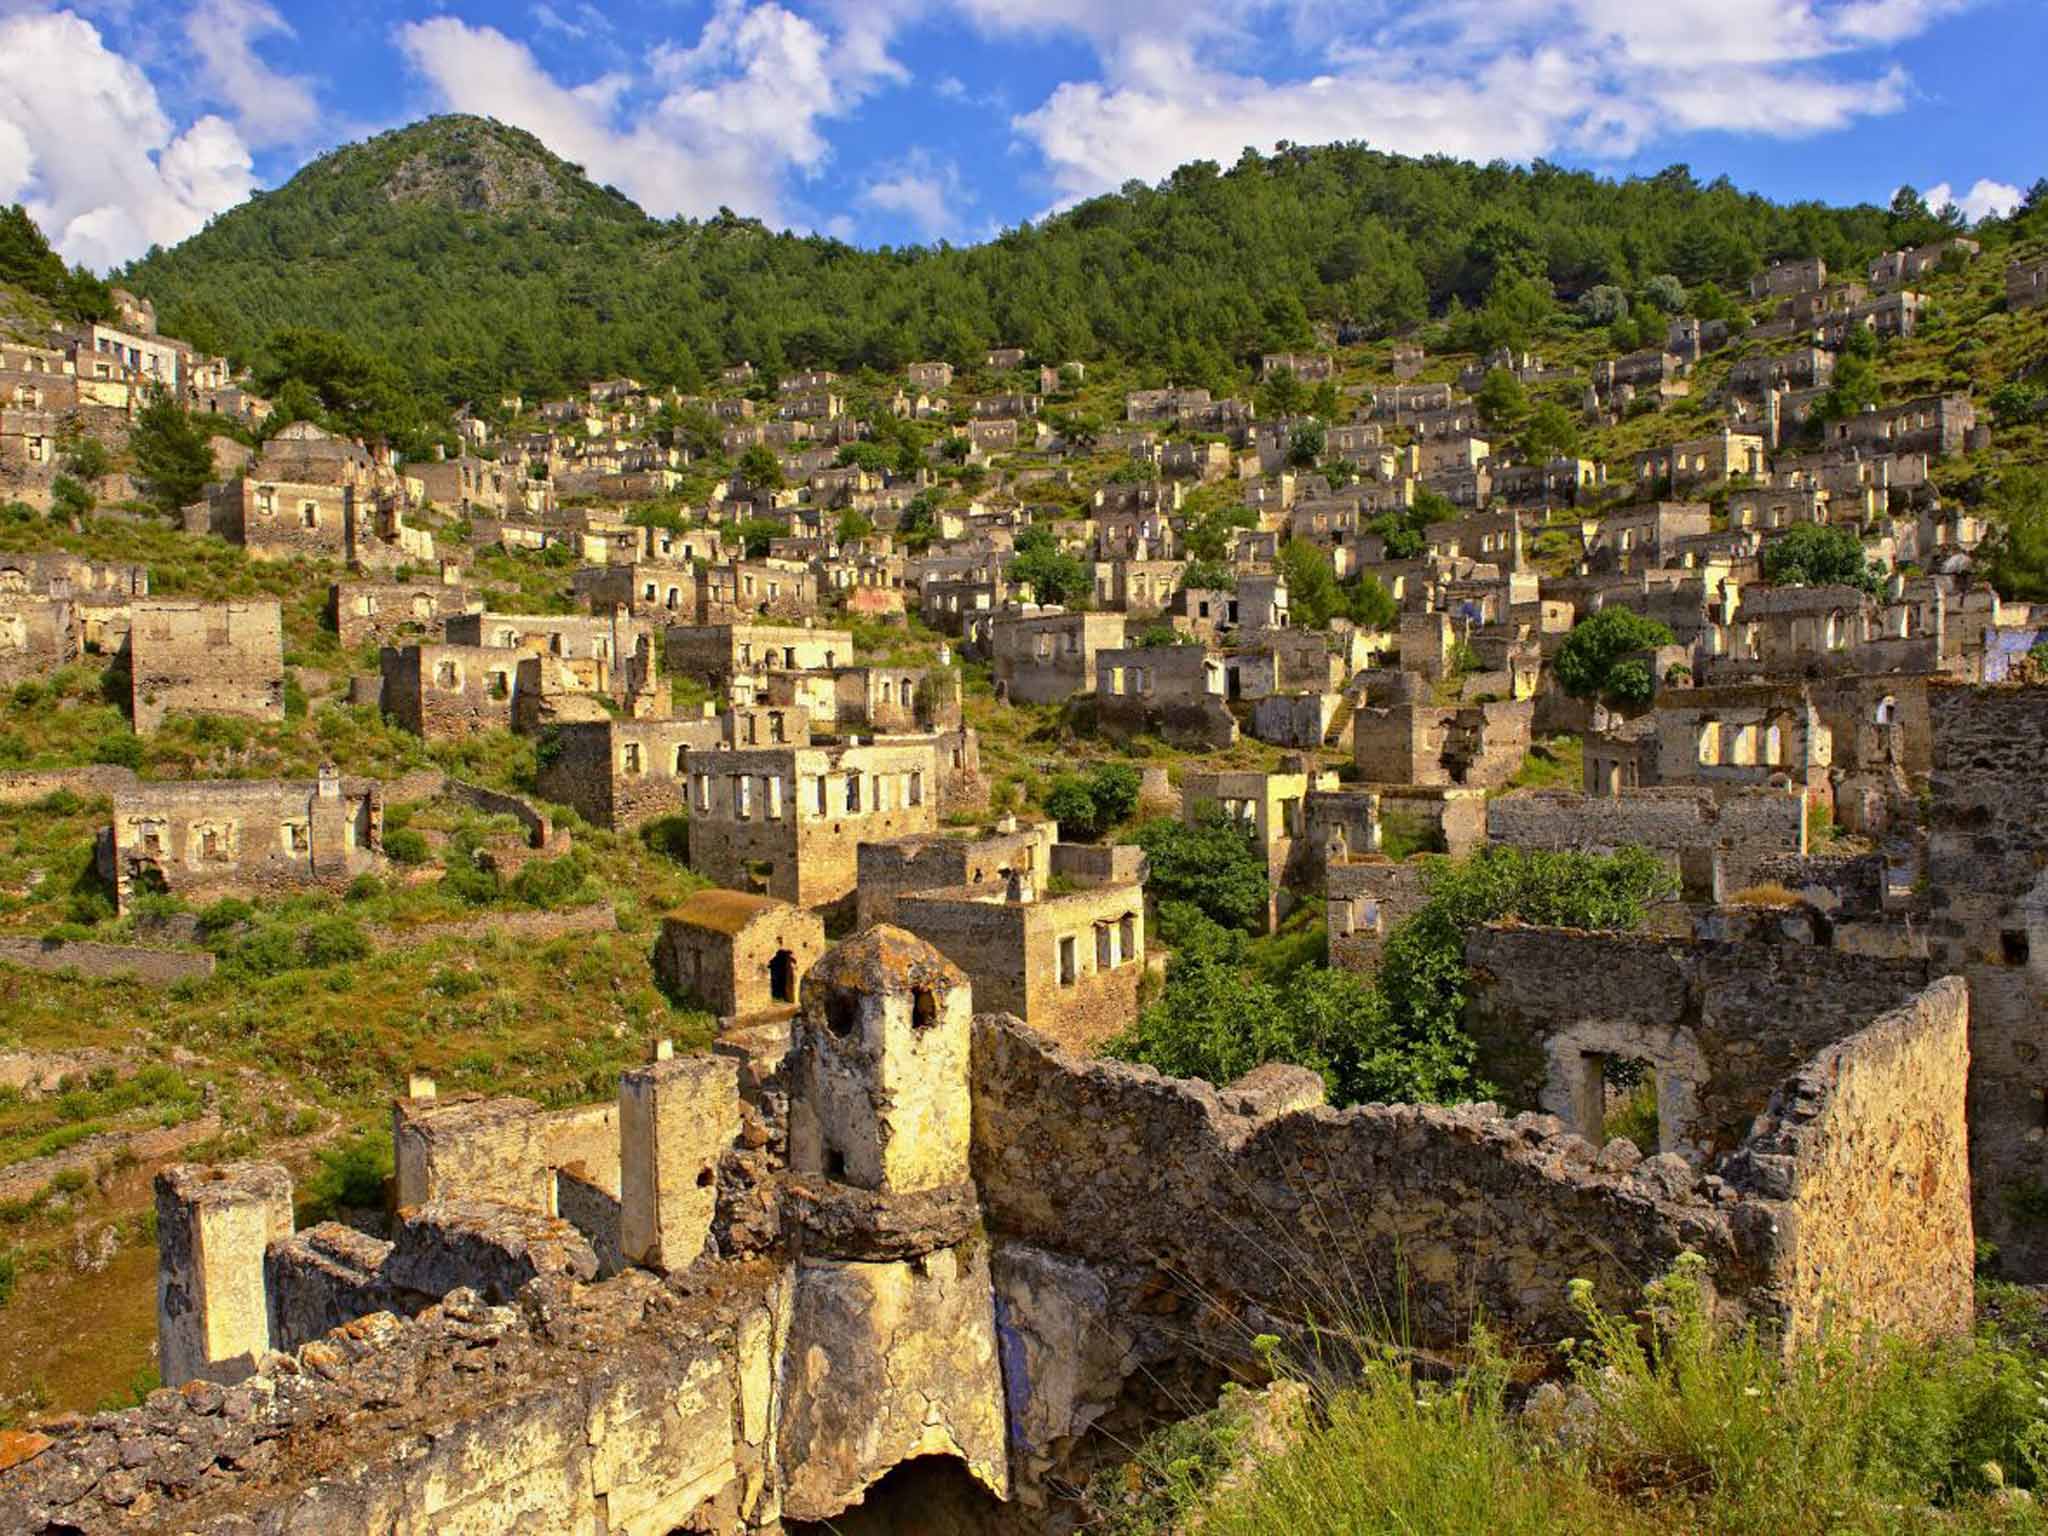 The ghost village of Kayakoy